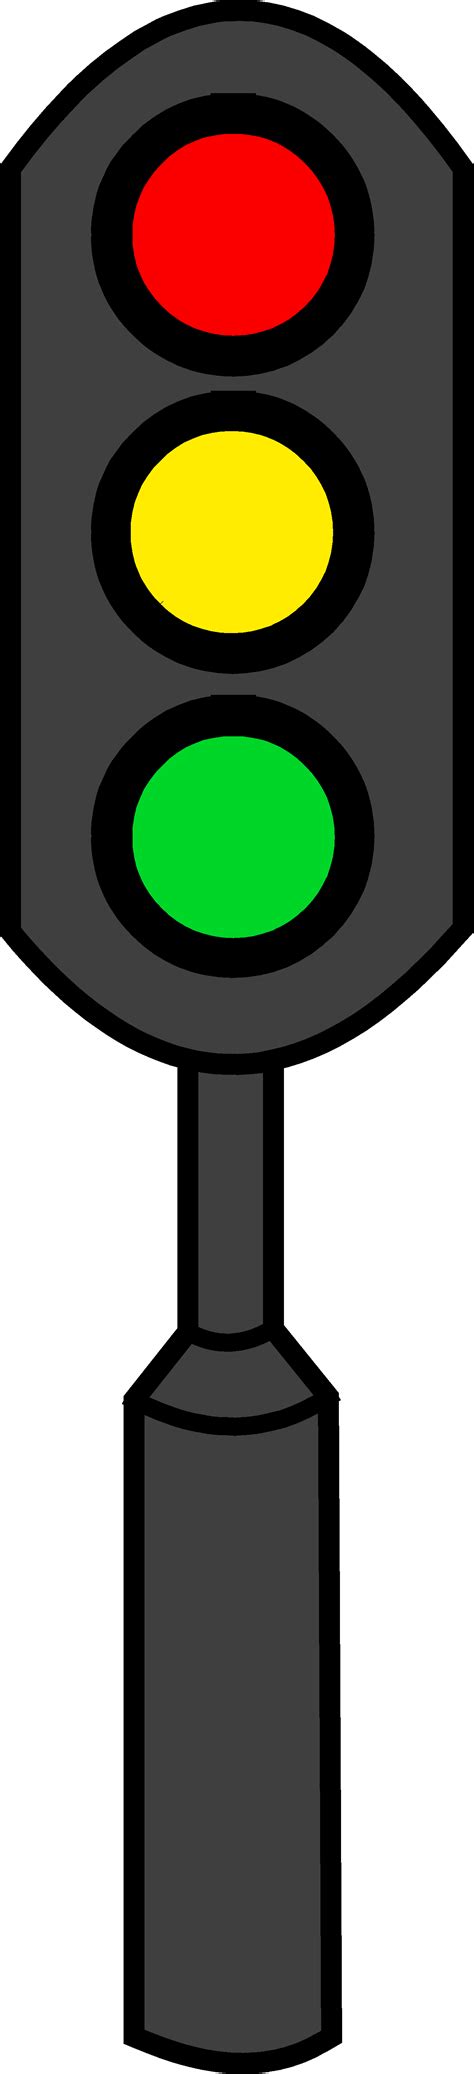 stop light clipart   stop light clipart png images  cliparts  clipart